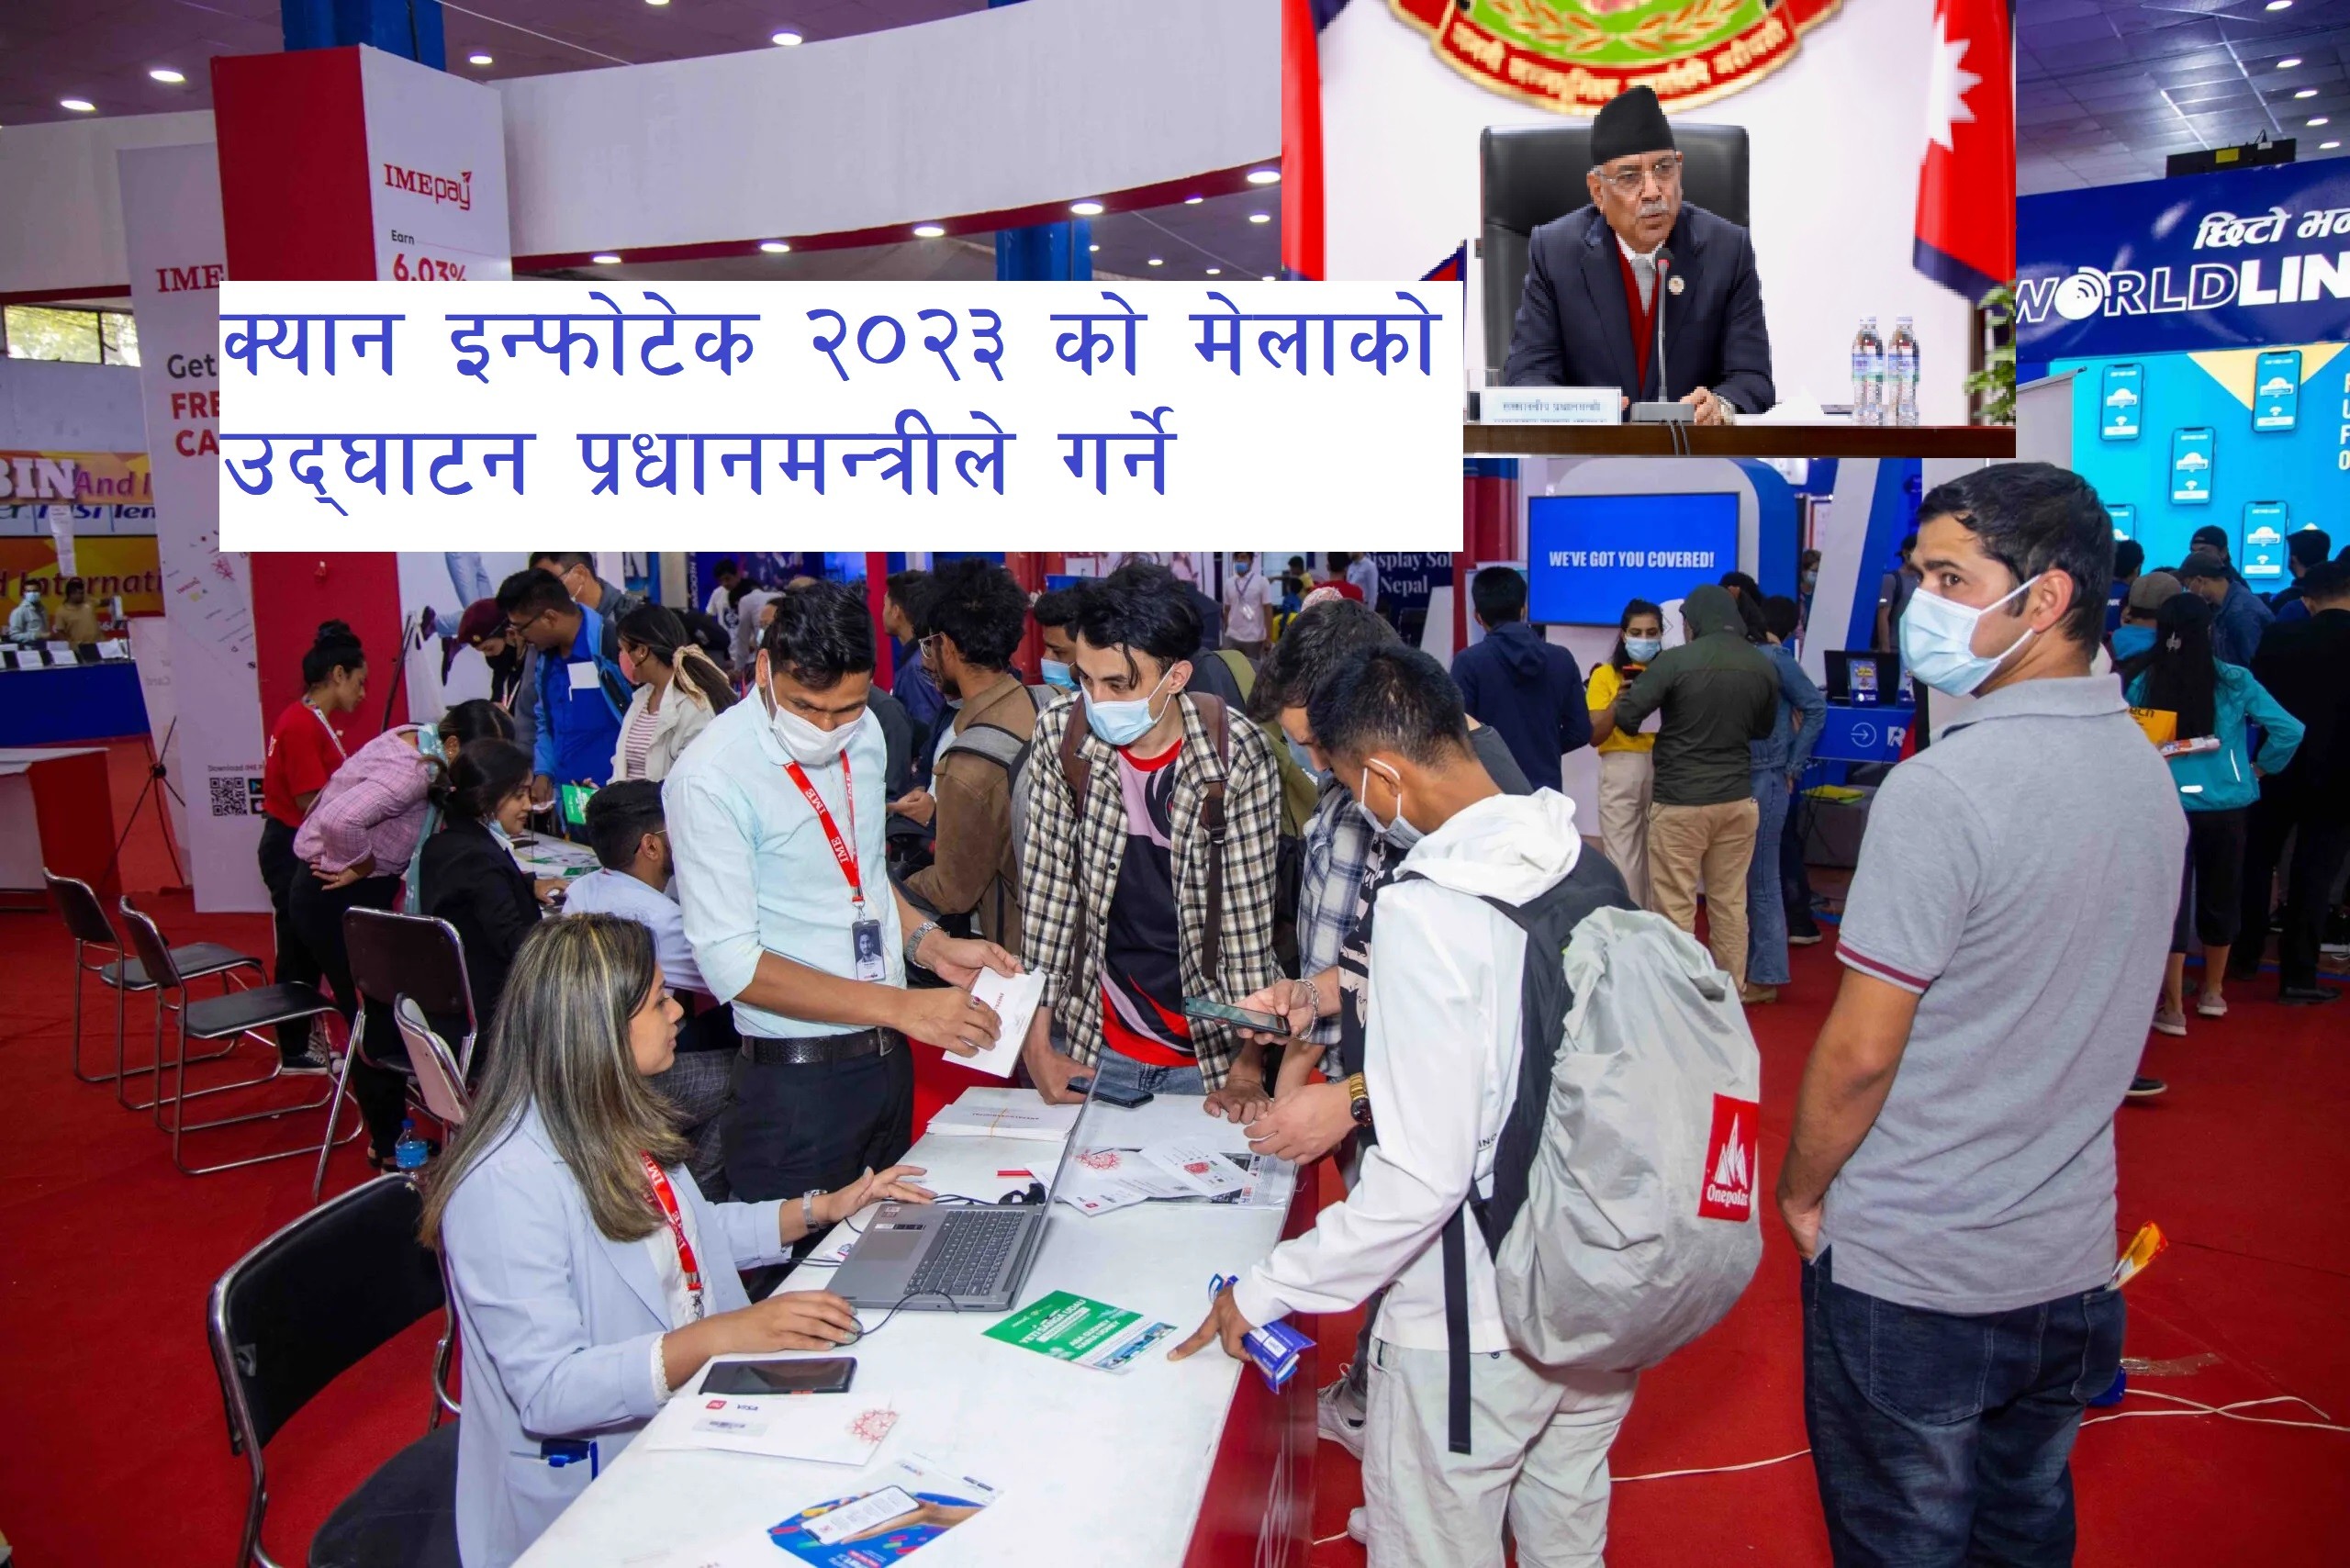 The 28th CAN Infotech 2023 will be inaugurated by Prime Minister Prachanda